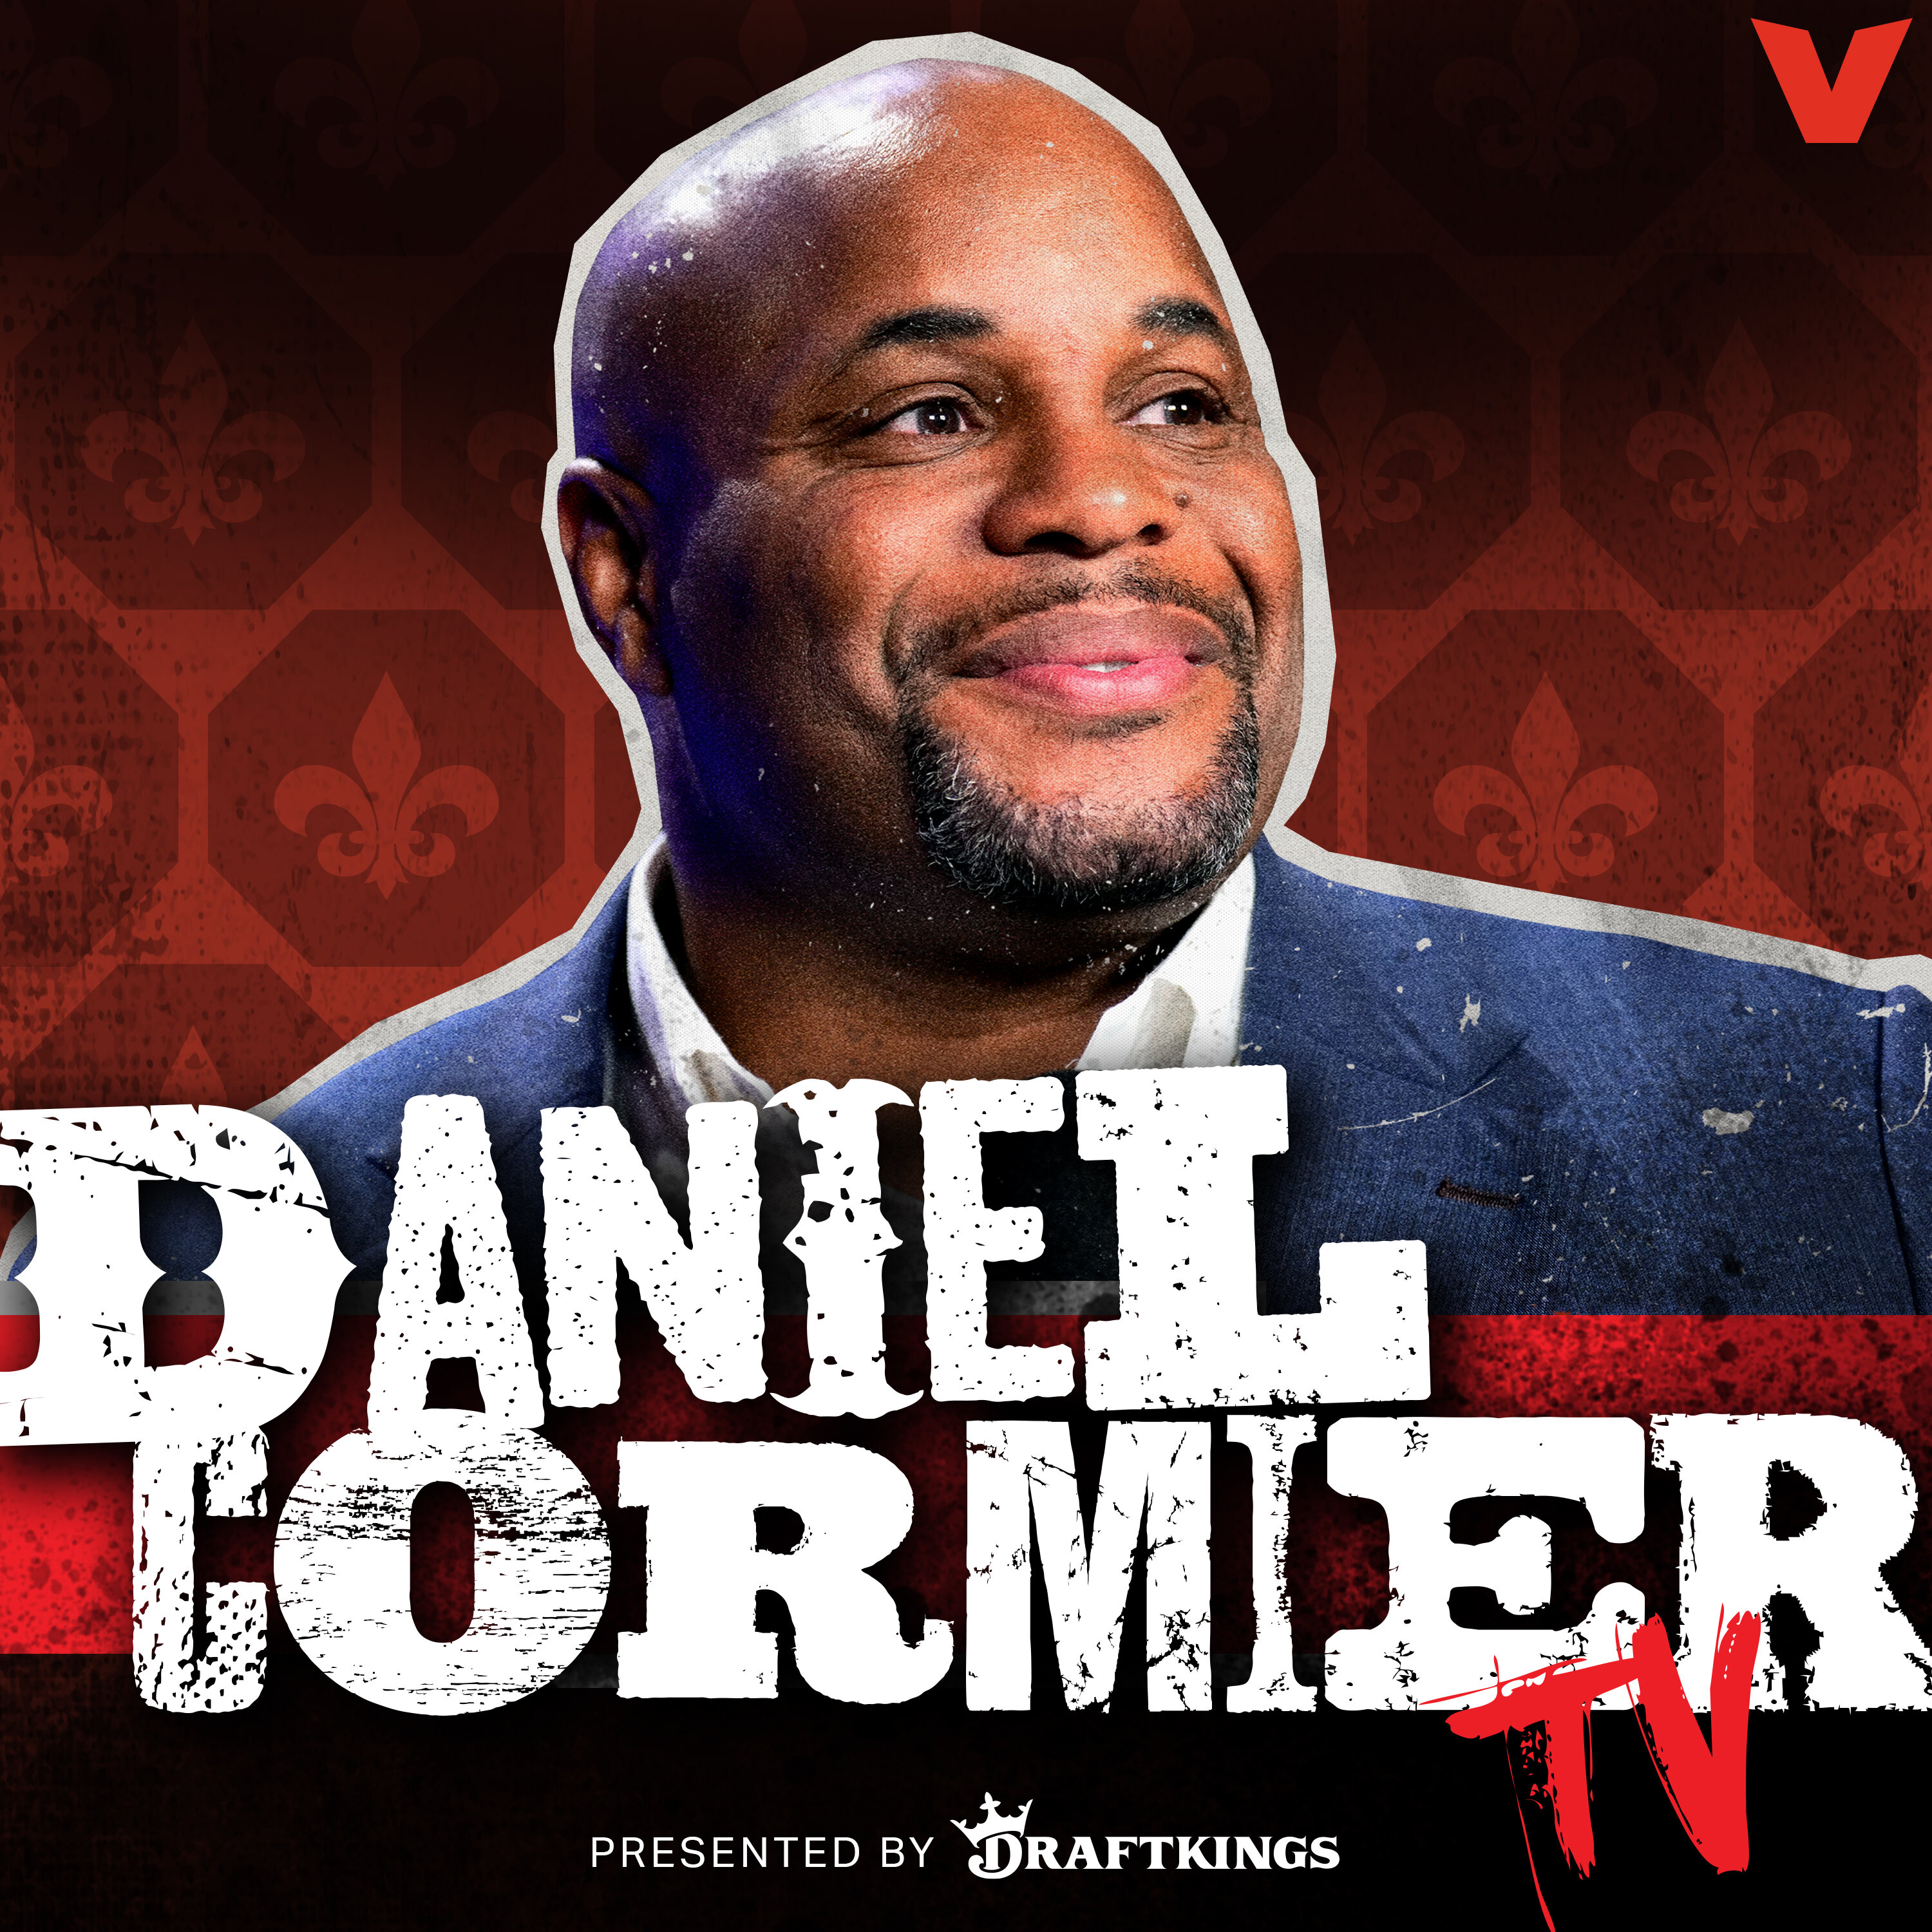 Daniel Cormier TV - Dustin Poirier vs. Islam Makhachev NEEDS TO BE OFFICIAL: ”BOOK IT RIGHT NOW”